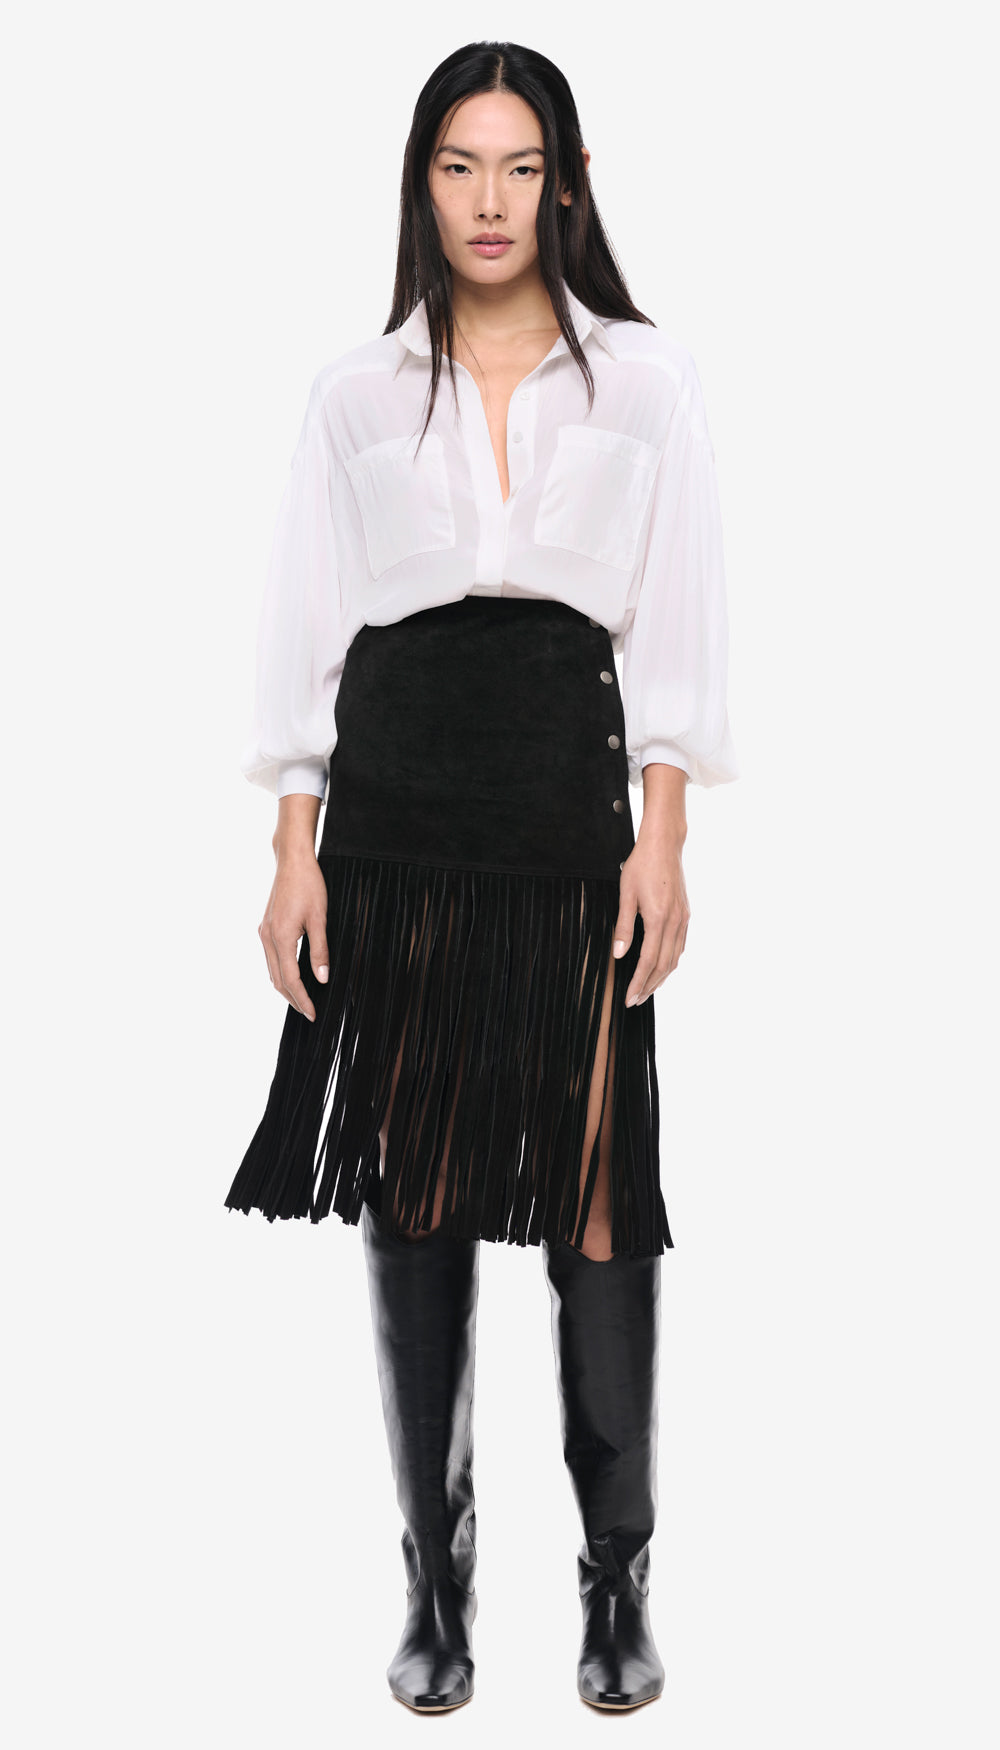 A woman in a solid white blouse and black fringe skirt.